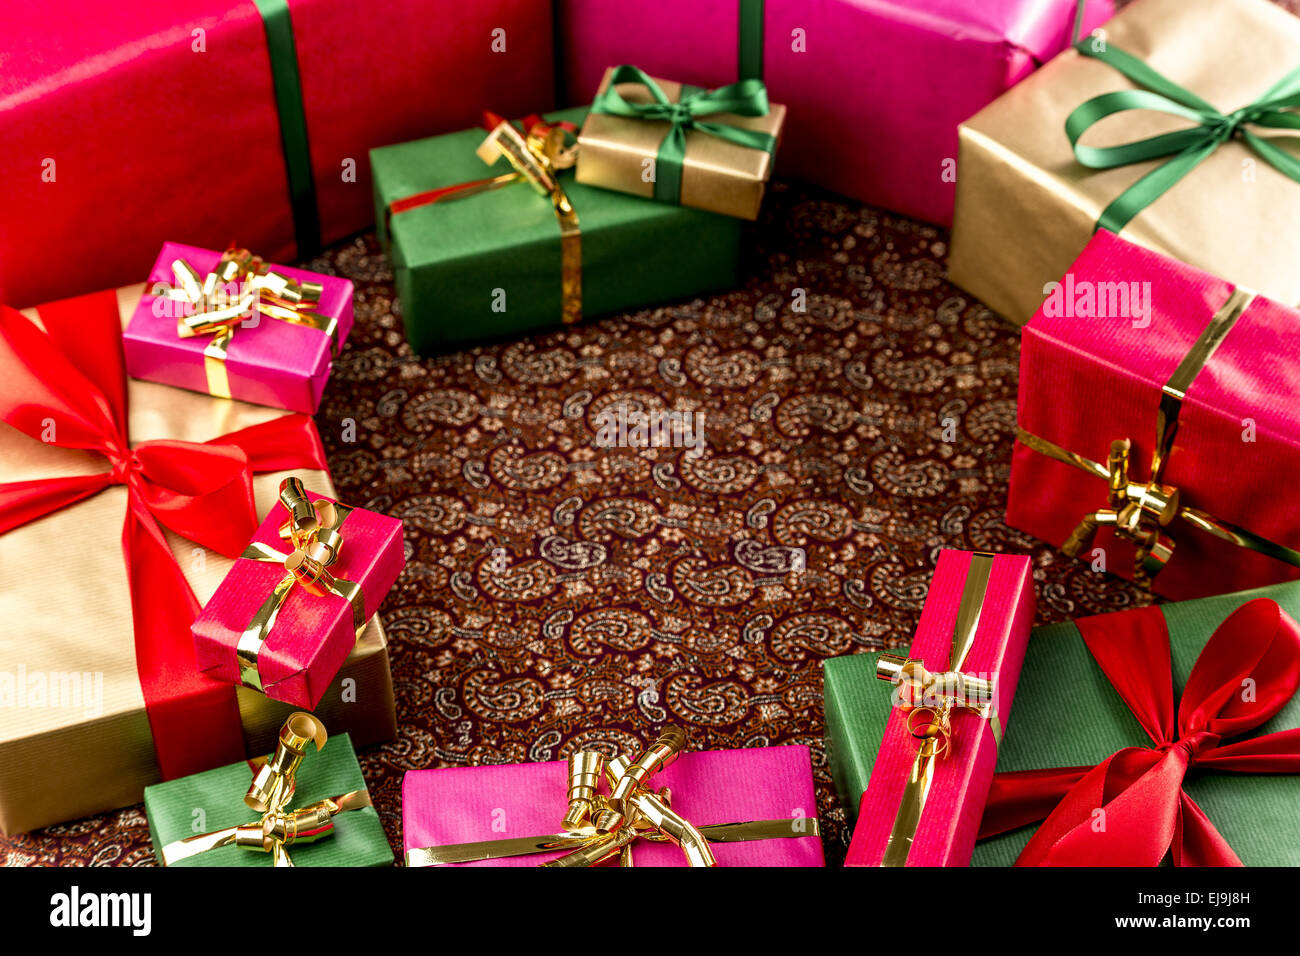 Circular Arrangement of Wrapped Gifts Stock Photo